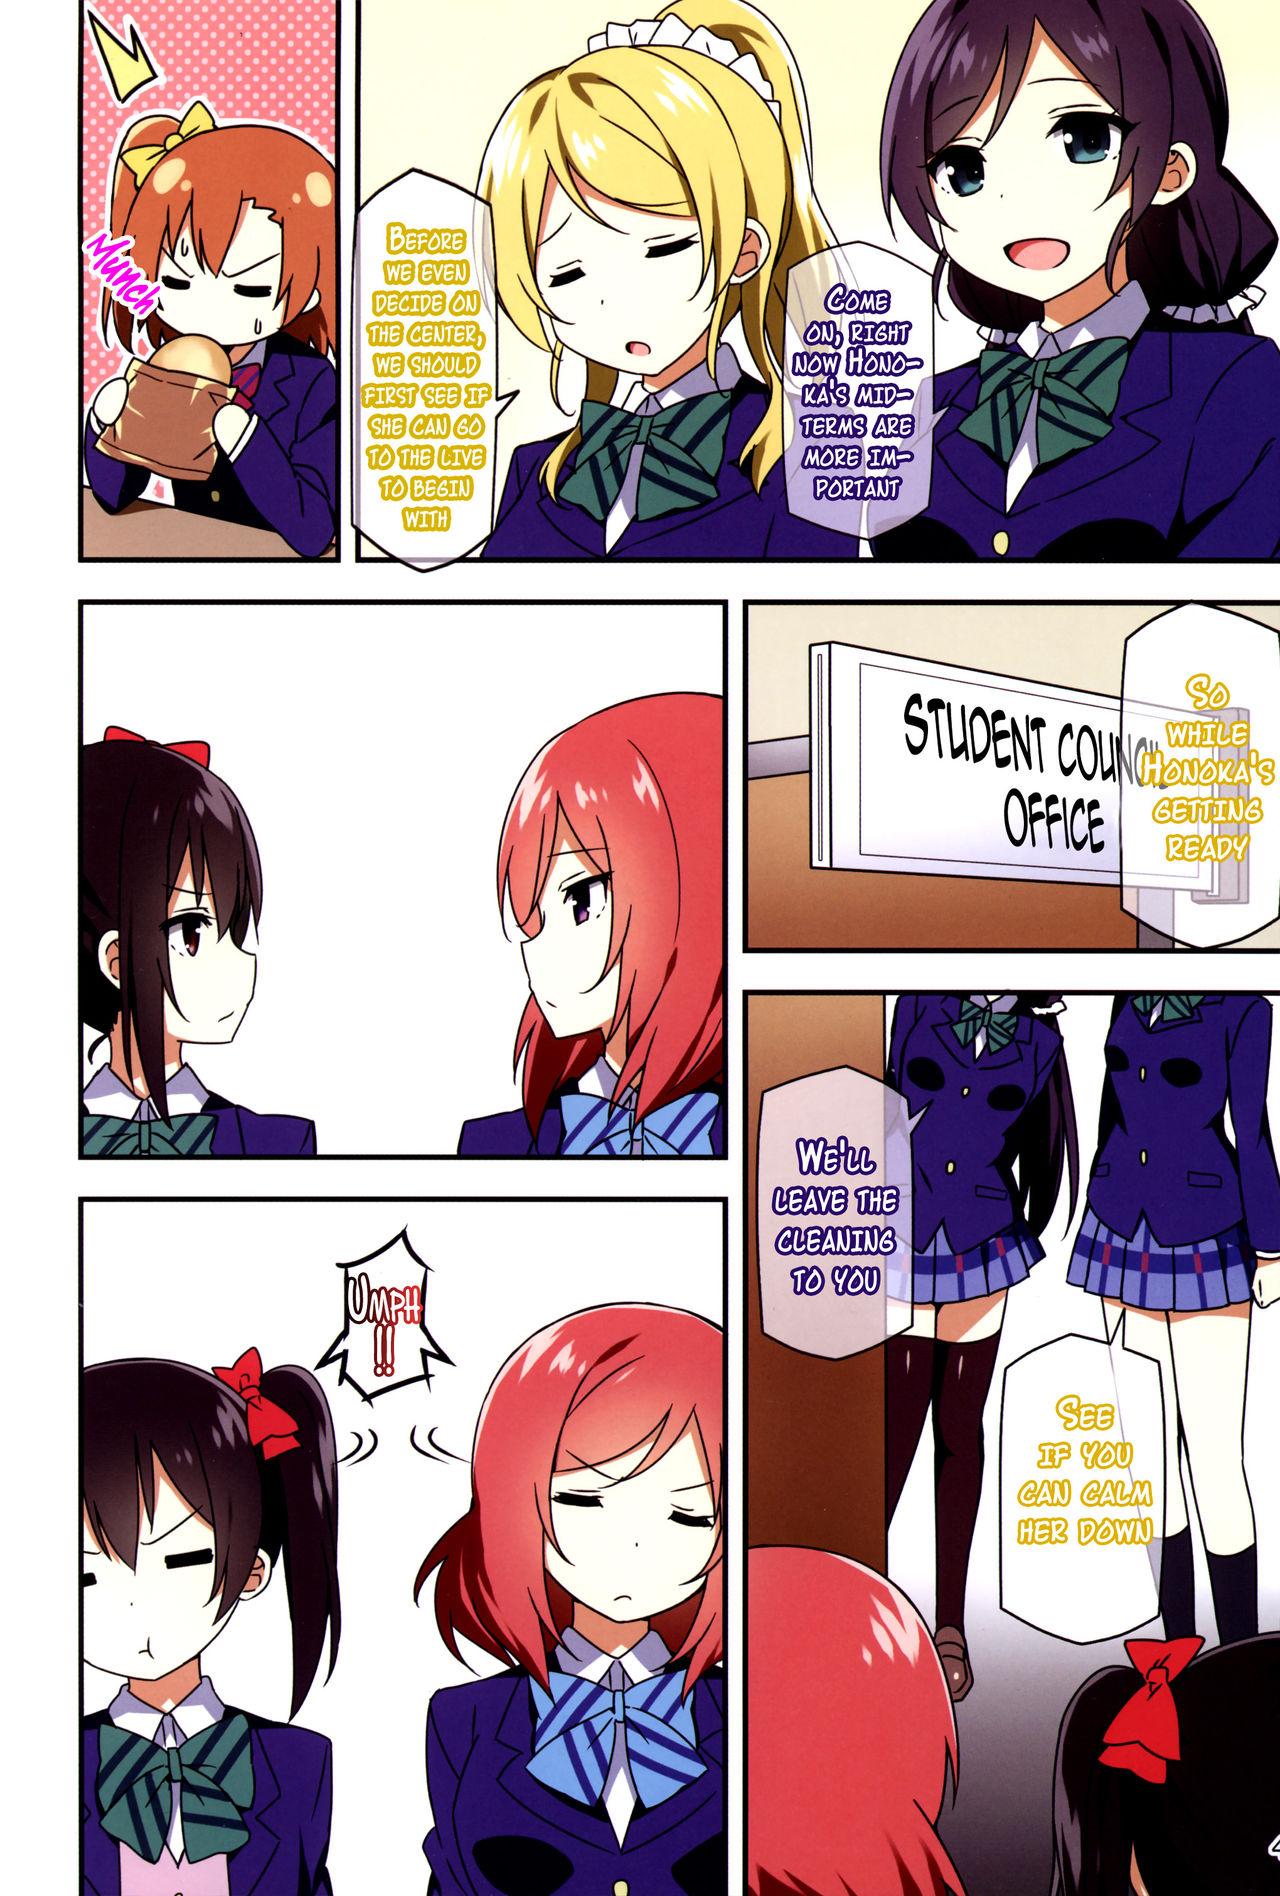 Party Endless Love - Love live Desperate - Page 3